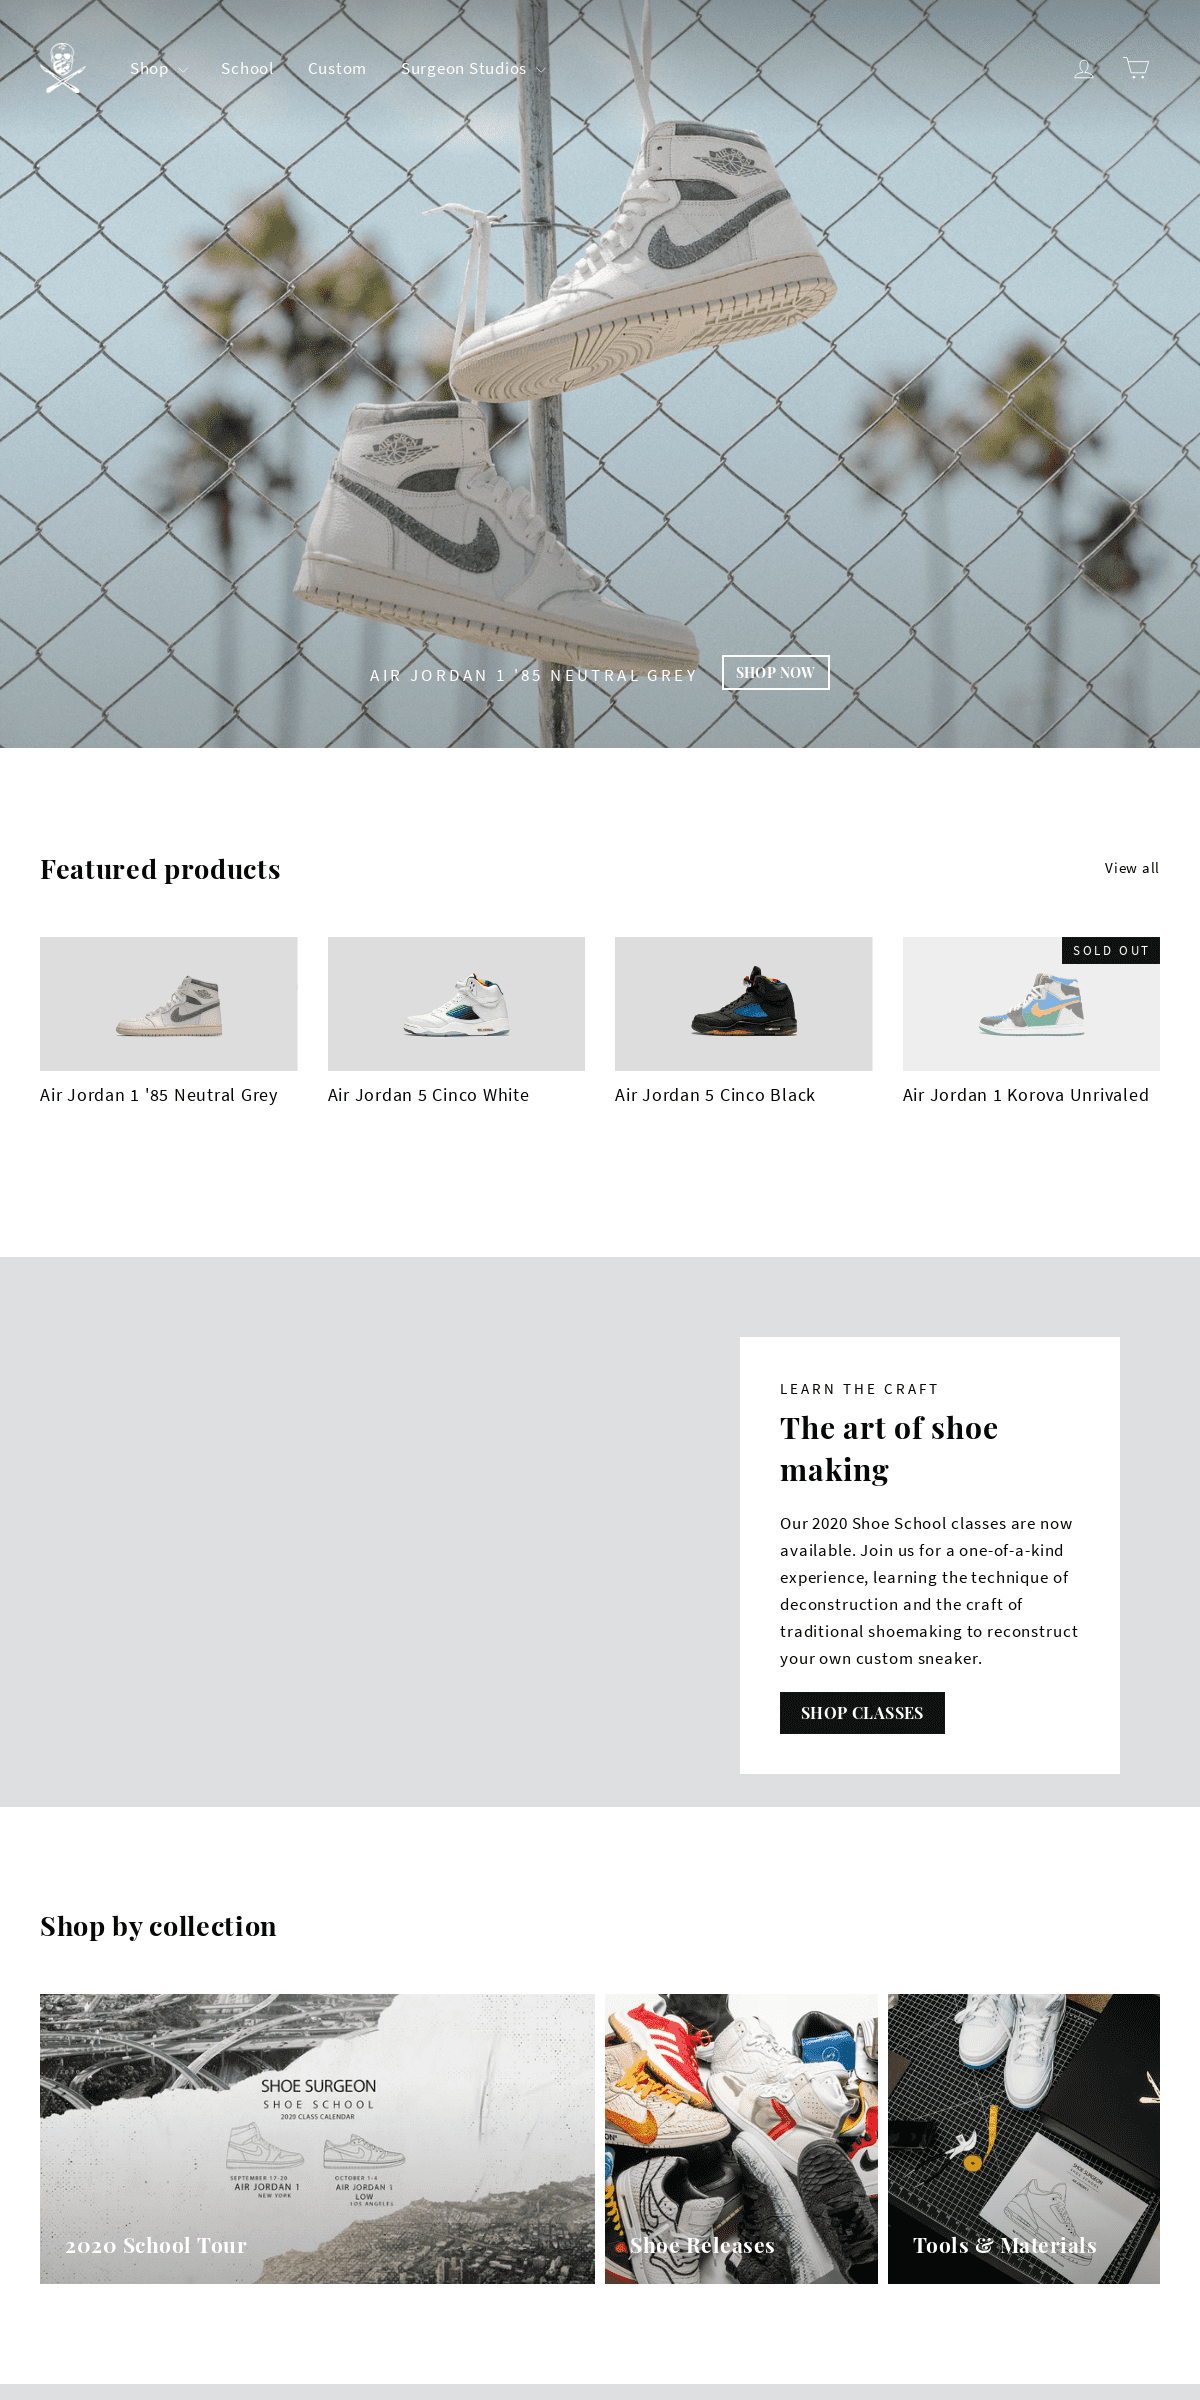 A complete backup of theshoesurgeon.com